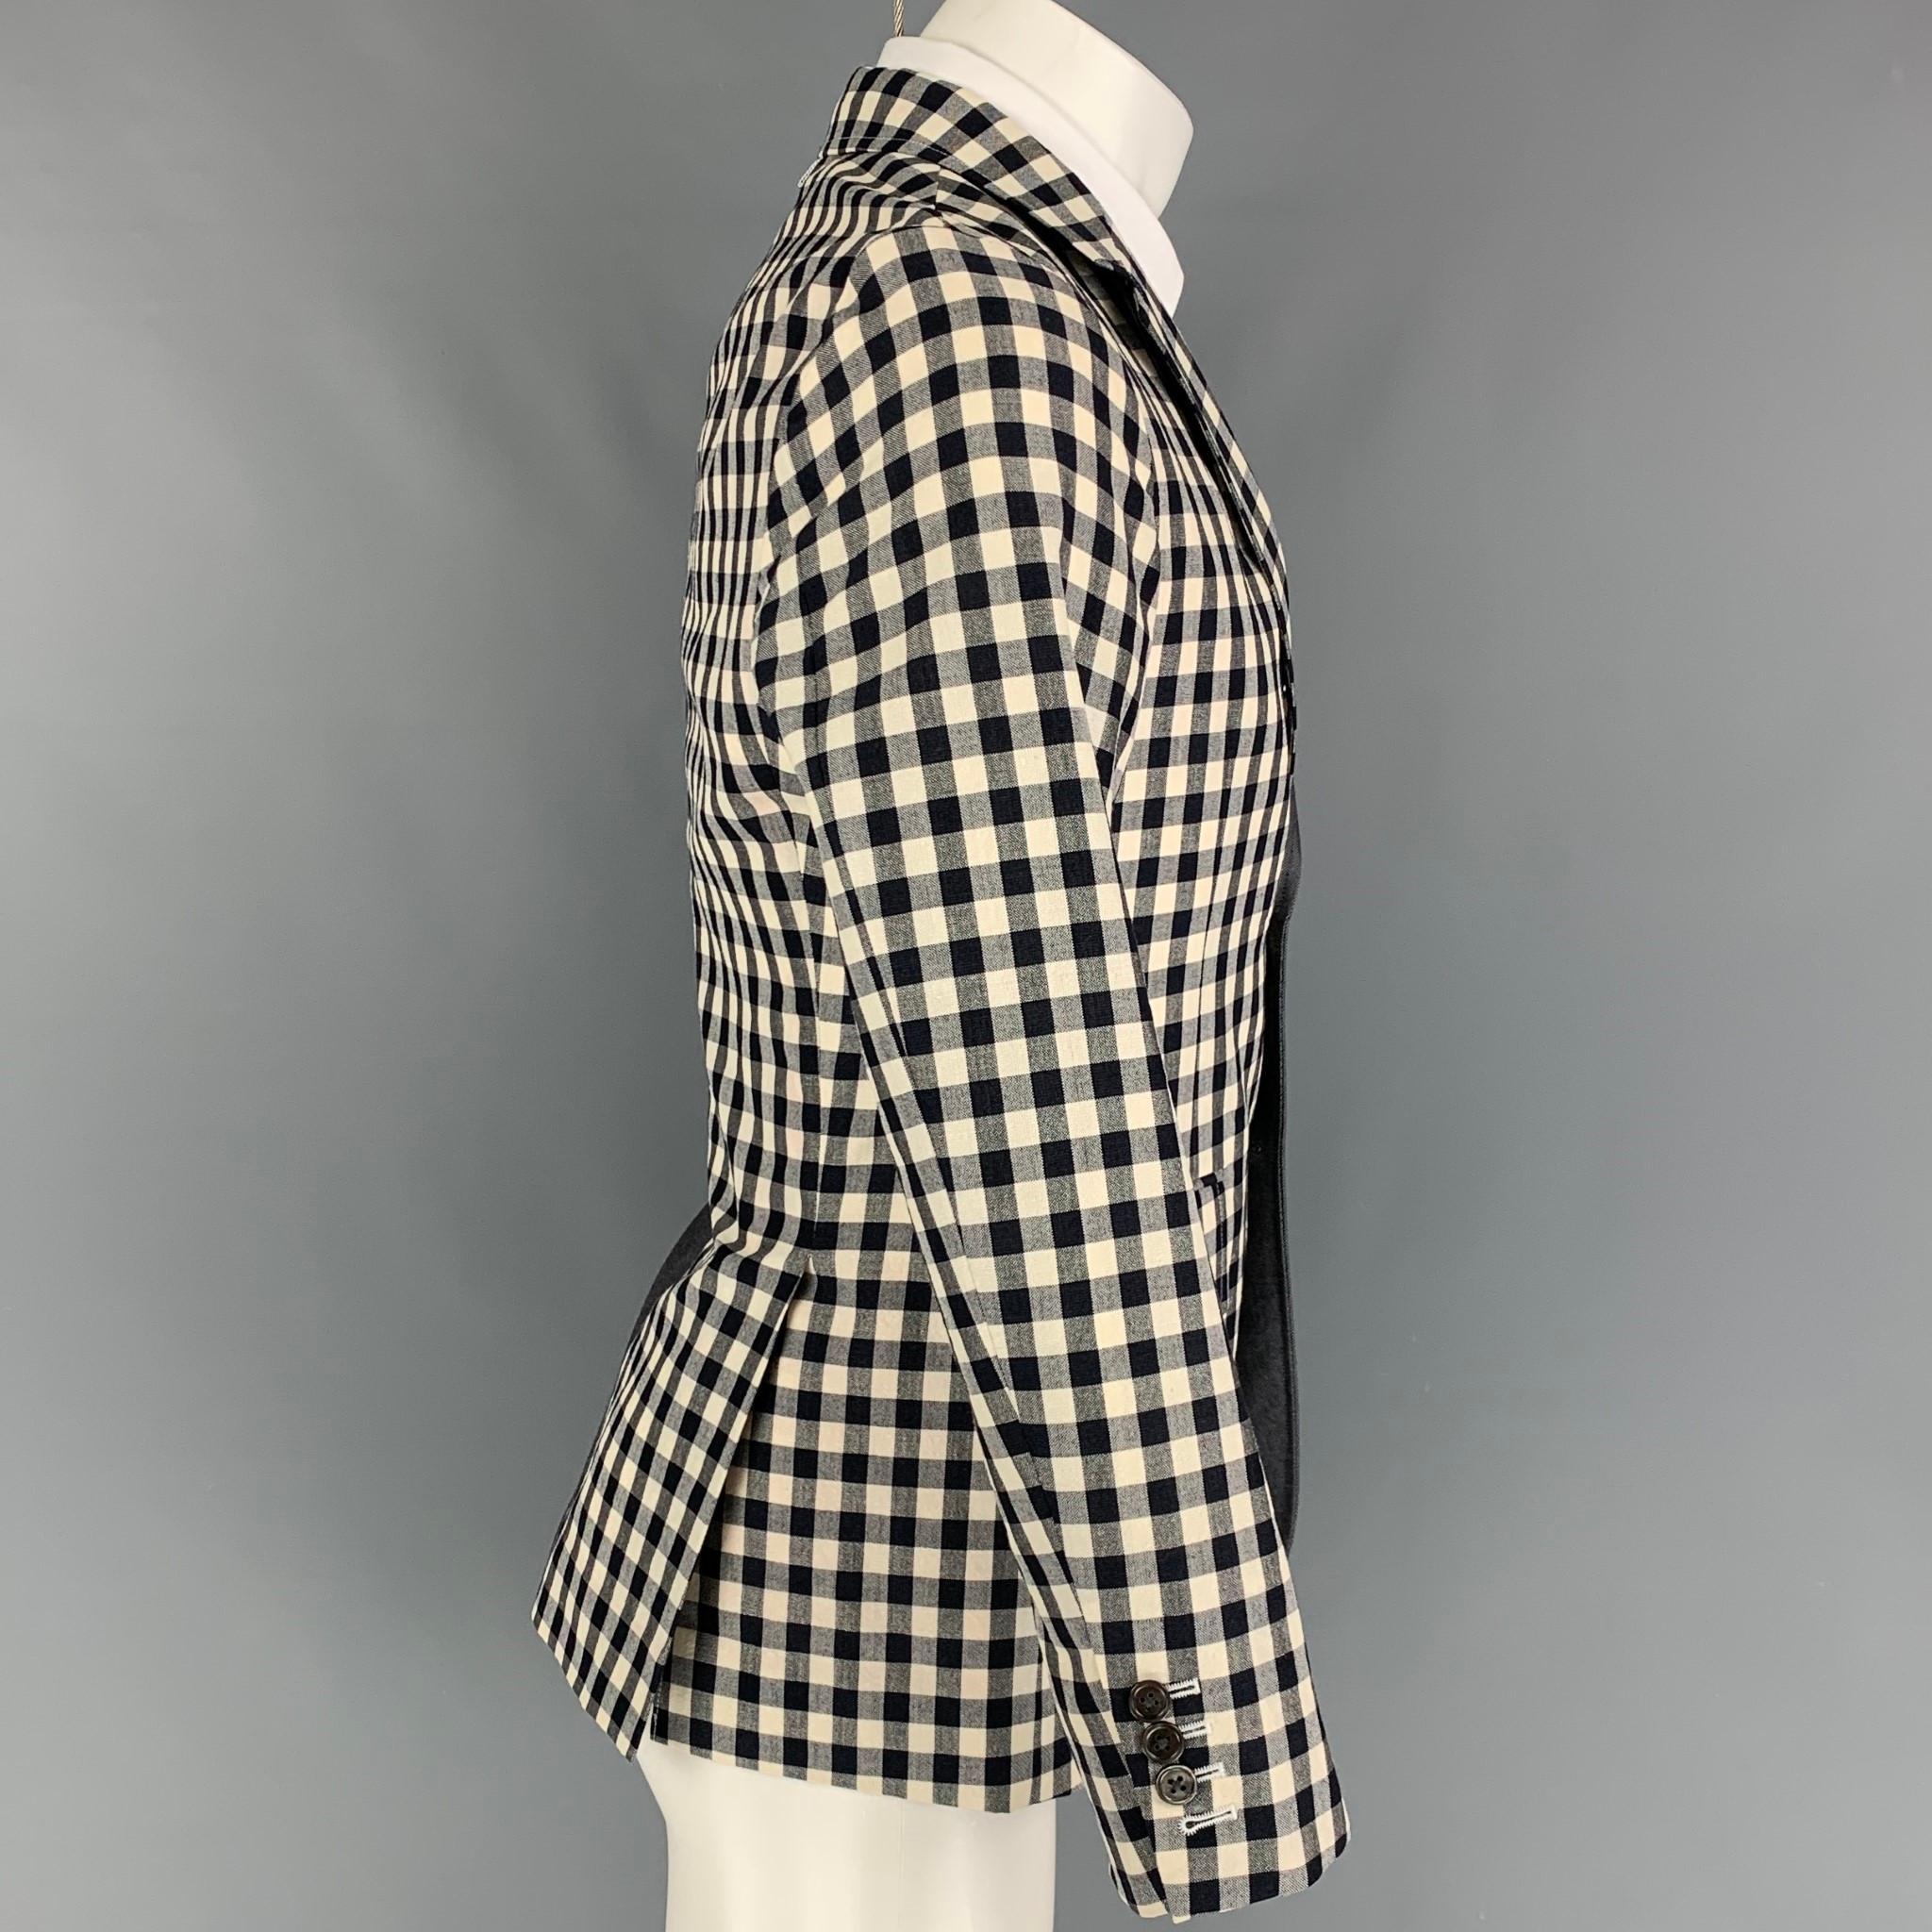 THOM BROWNE sport coat comes in a navy & red wool blend with a half liner featuring a half checkered design. notch lapel, flap pockets, double back vent, and a three button closure. Made in Japan. 

Very Good Pre-Owned Condition. Faint mark at